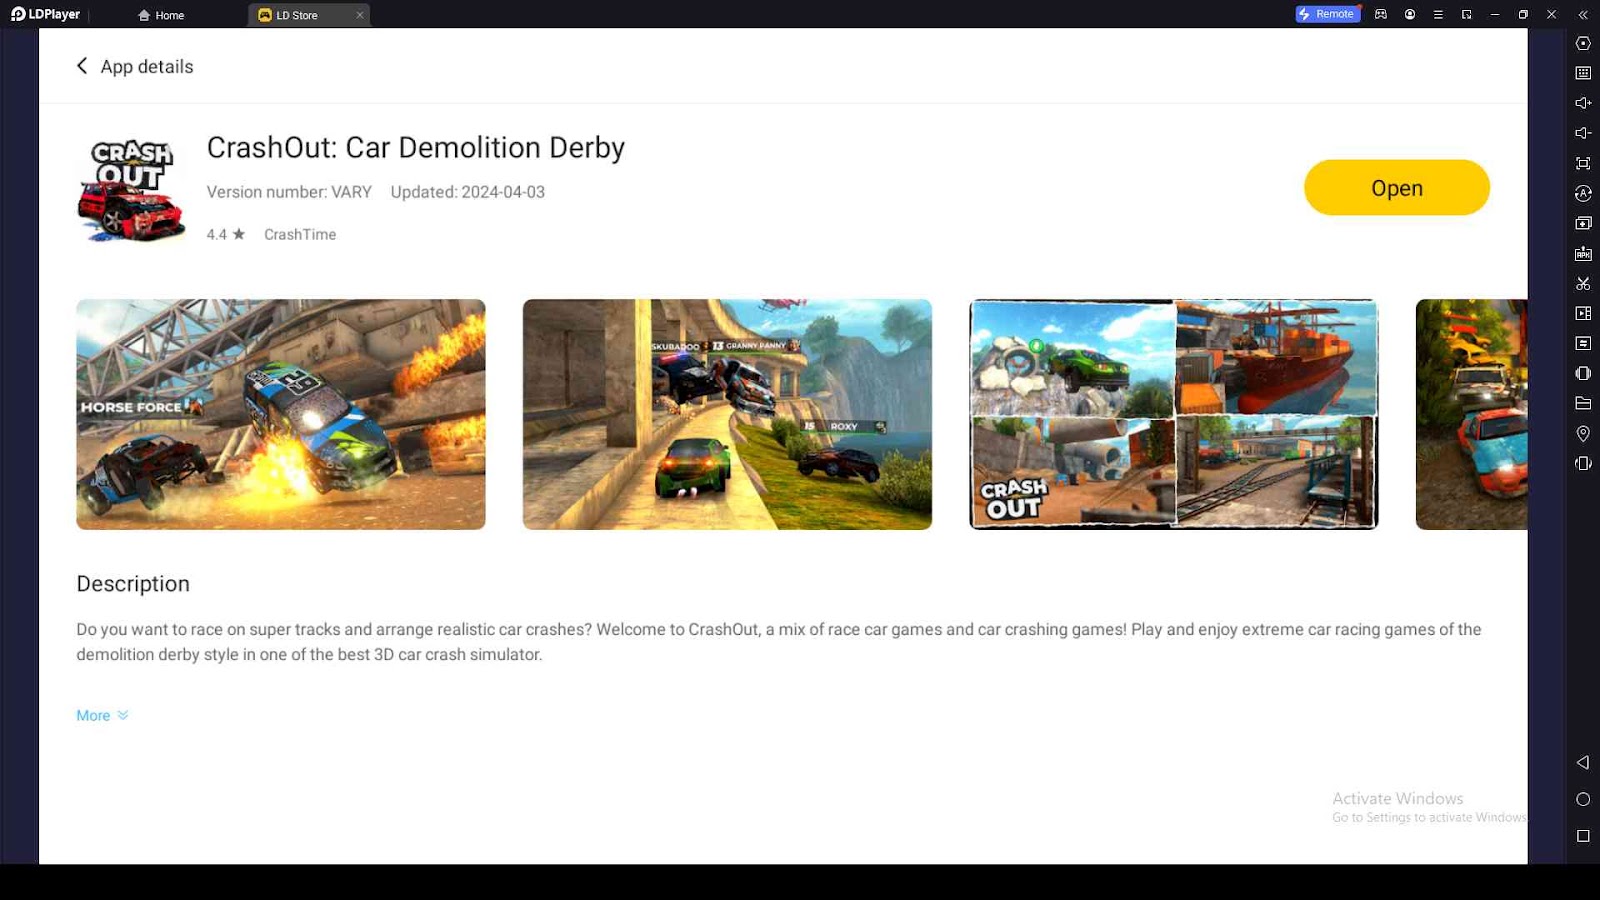 Playing CrashOut: Car Demolition Derby on PC with LDPlayer